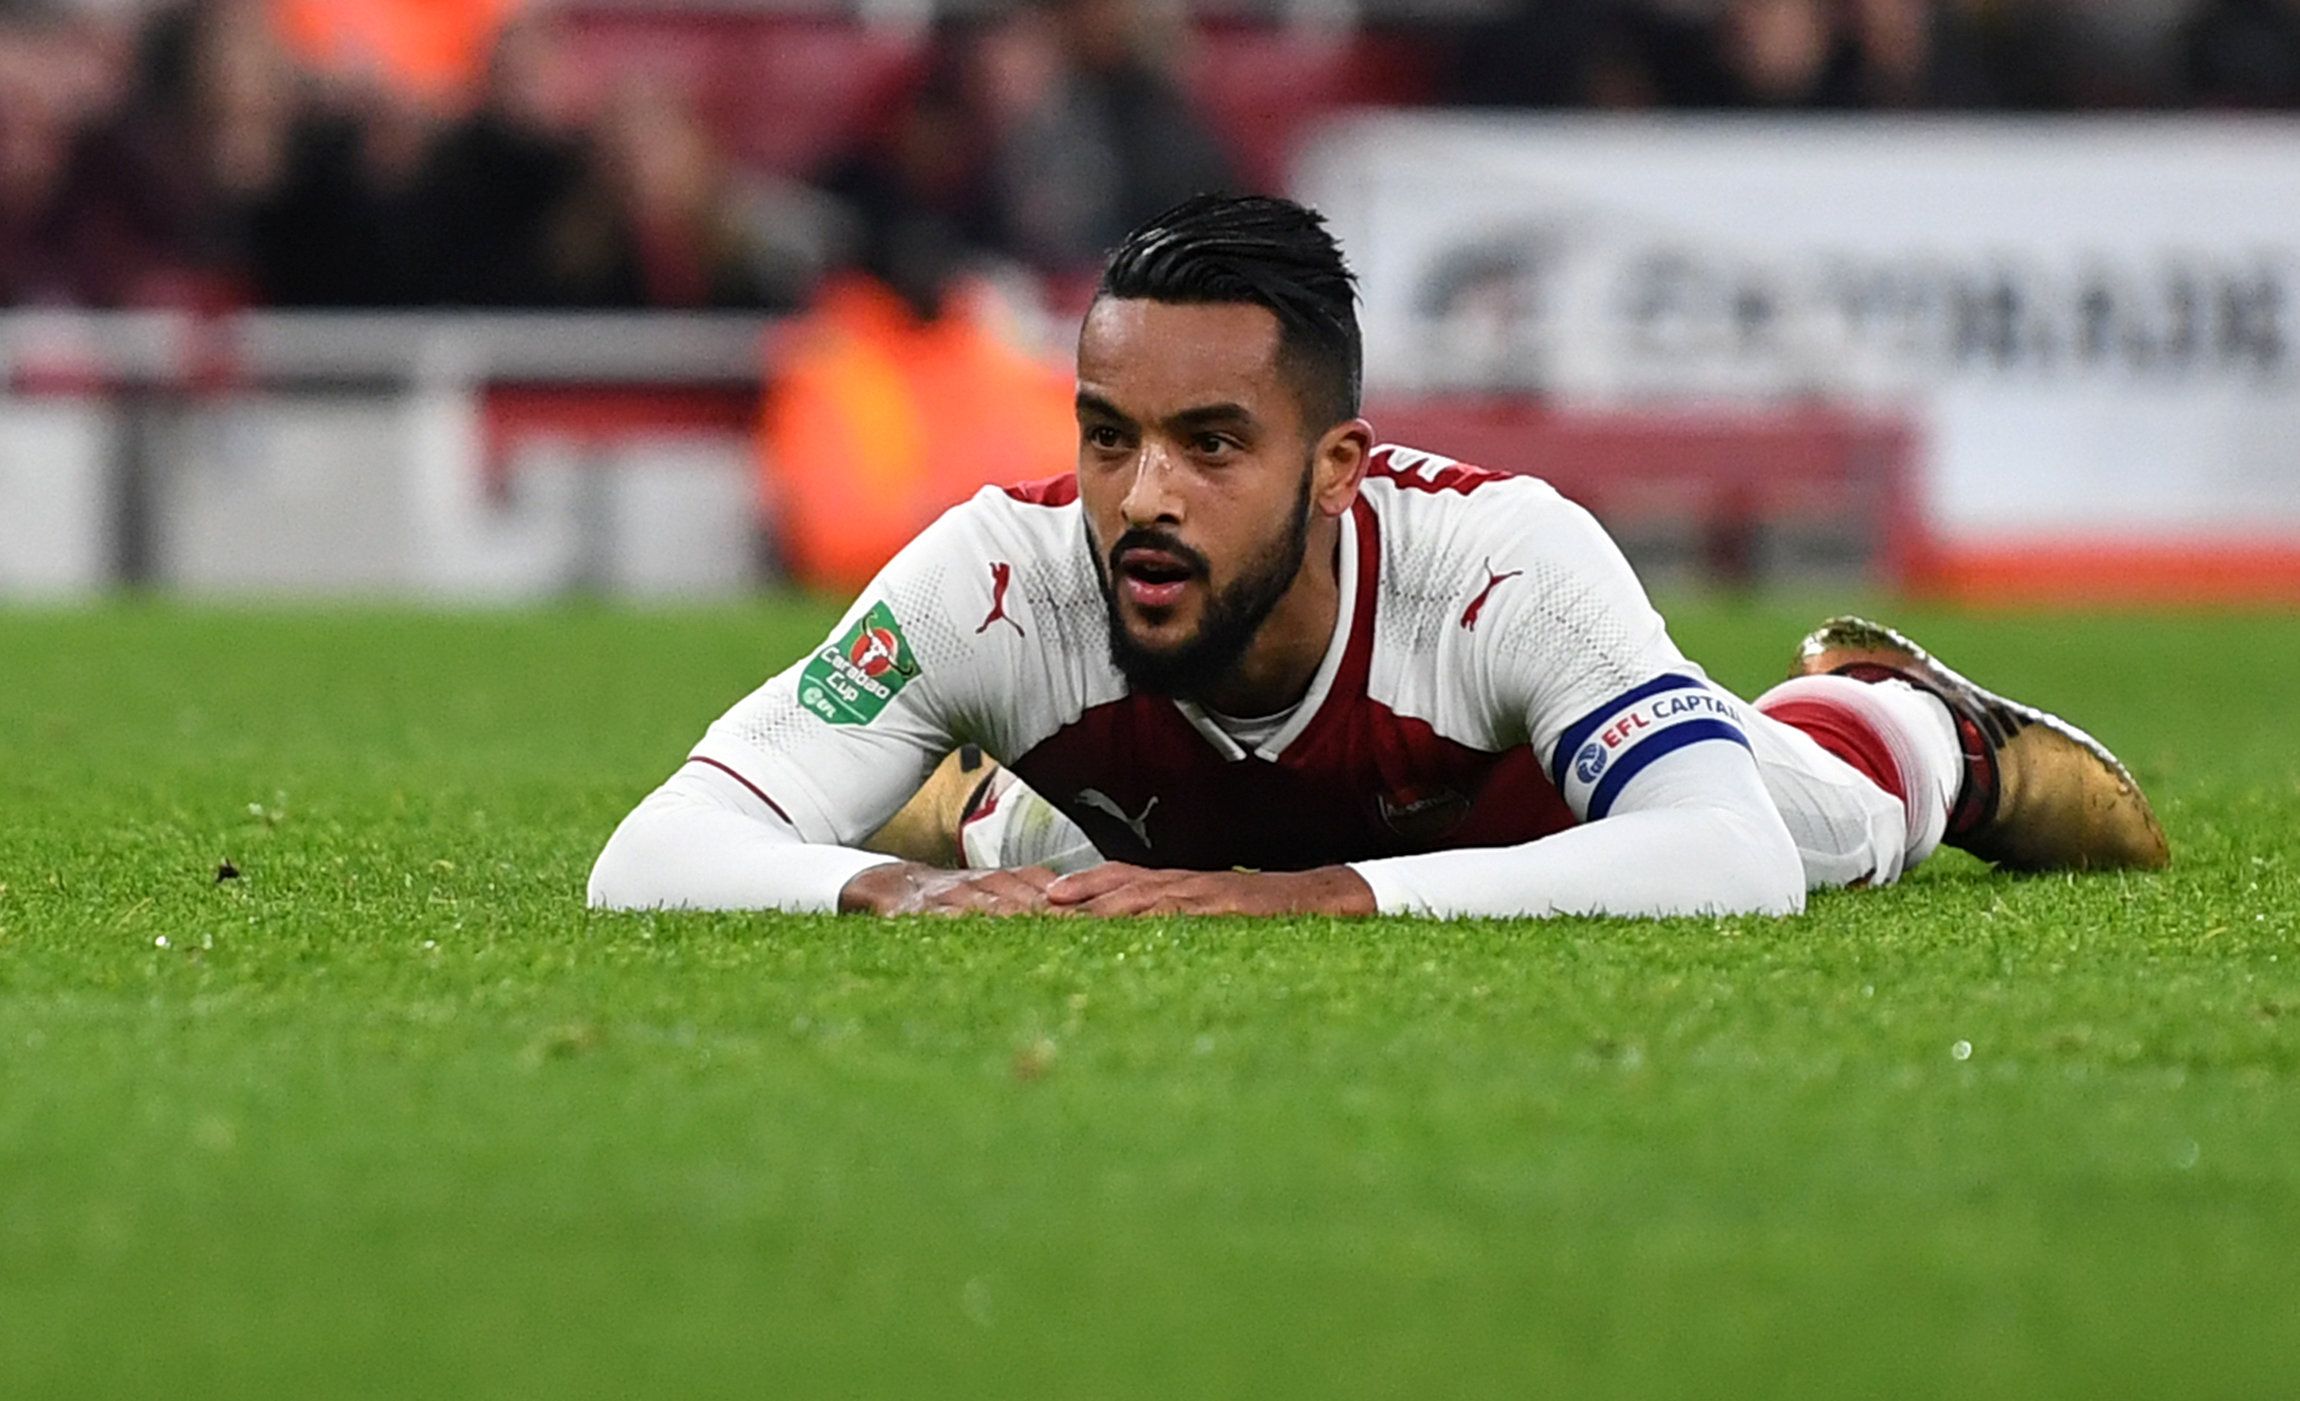 Soccer Football - Carabao Cup Quarter Final - Arsenal vs West Ham United - Emirates Stadium, London, Britain - December 19, 2017   Arsenal's Theo Walcott looks on      REUTERS/Dylan Martinez    EDITORIAL USE ONLY. No use with unauthorized audio, video, data, fixture lists, club/league logos or 